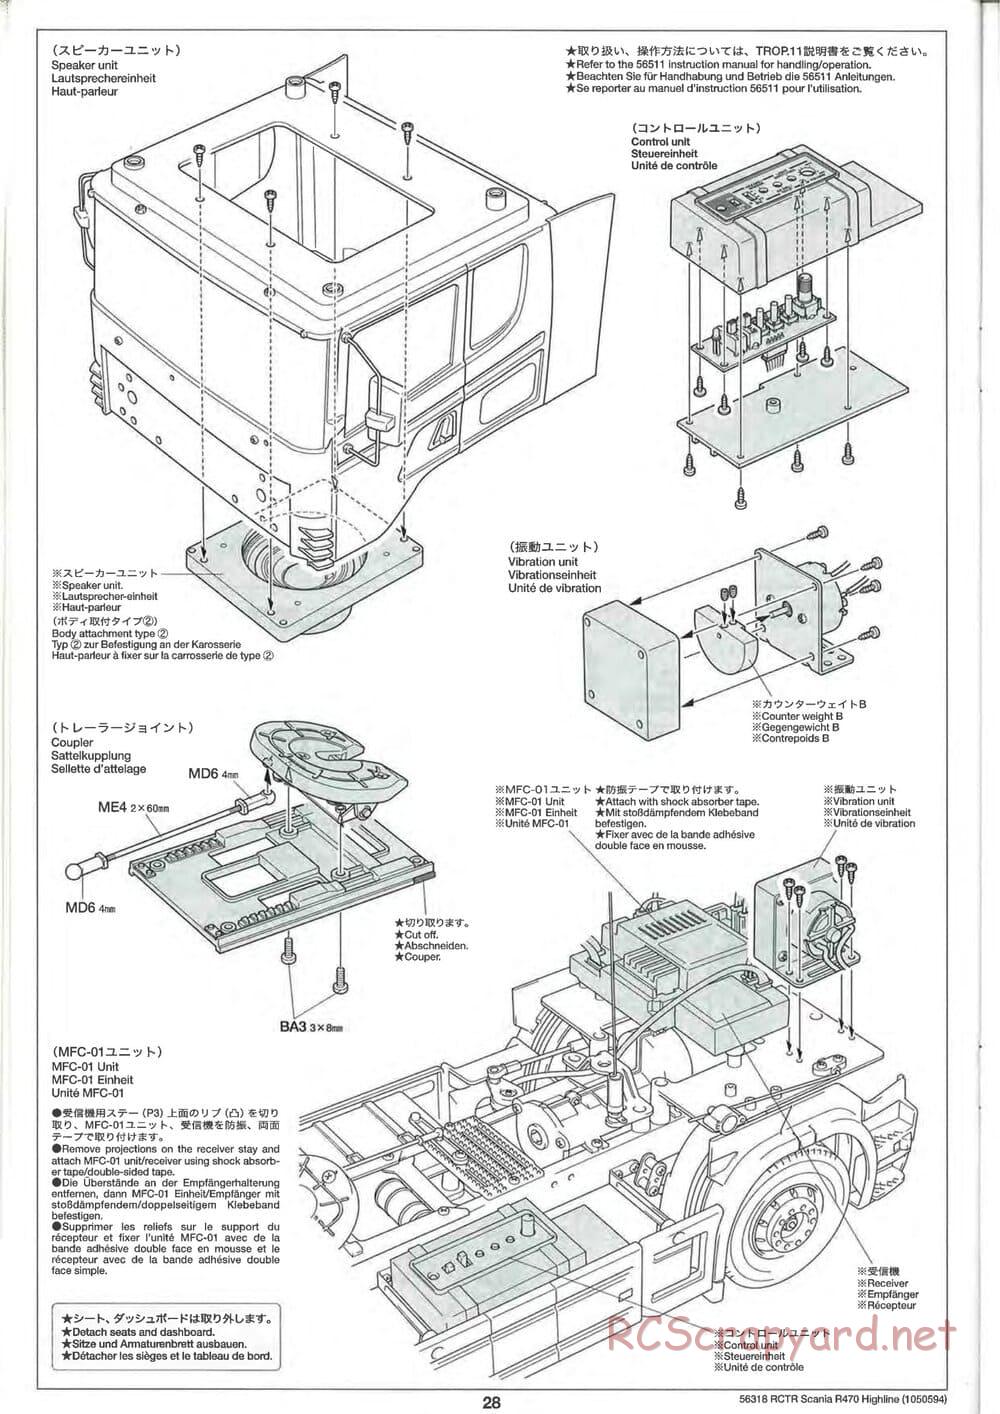 Tamiya - Scania R470 Highline Tractor Truck Chassis - Manual - Page 28